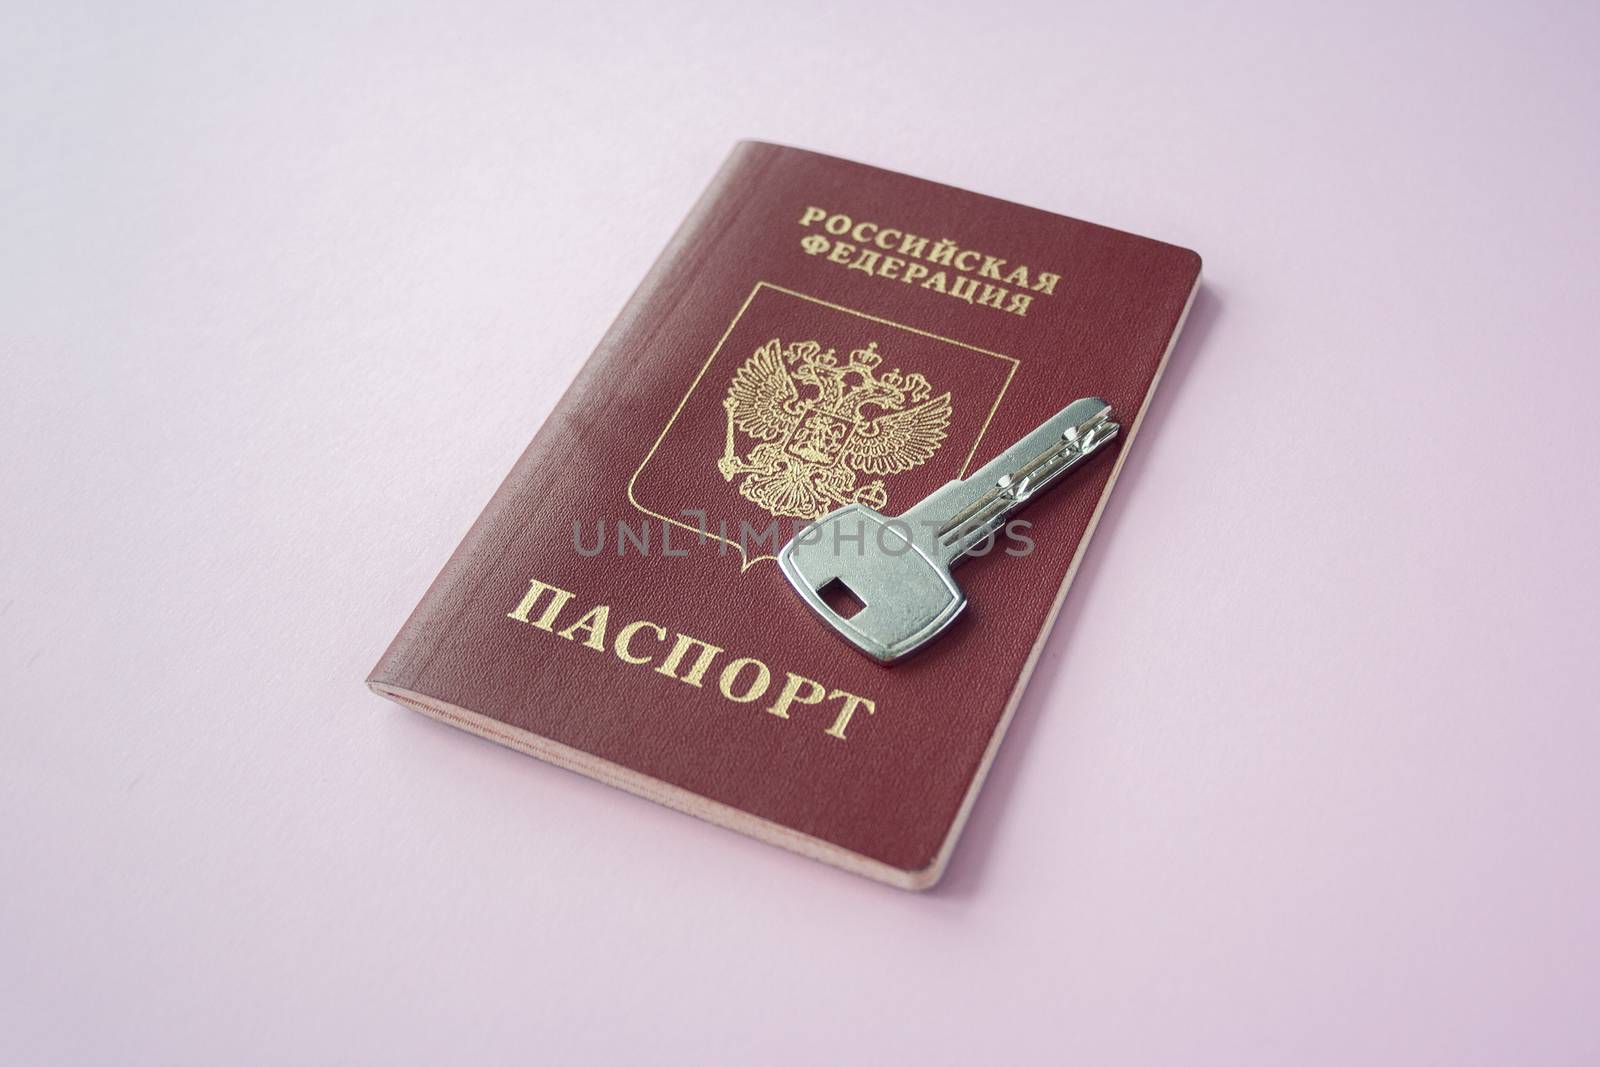 Russian international Passport and key  with trinket house on it on pink background close up copy space. Immigration, emigration, citizenship concept